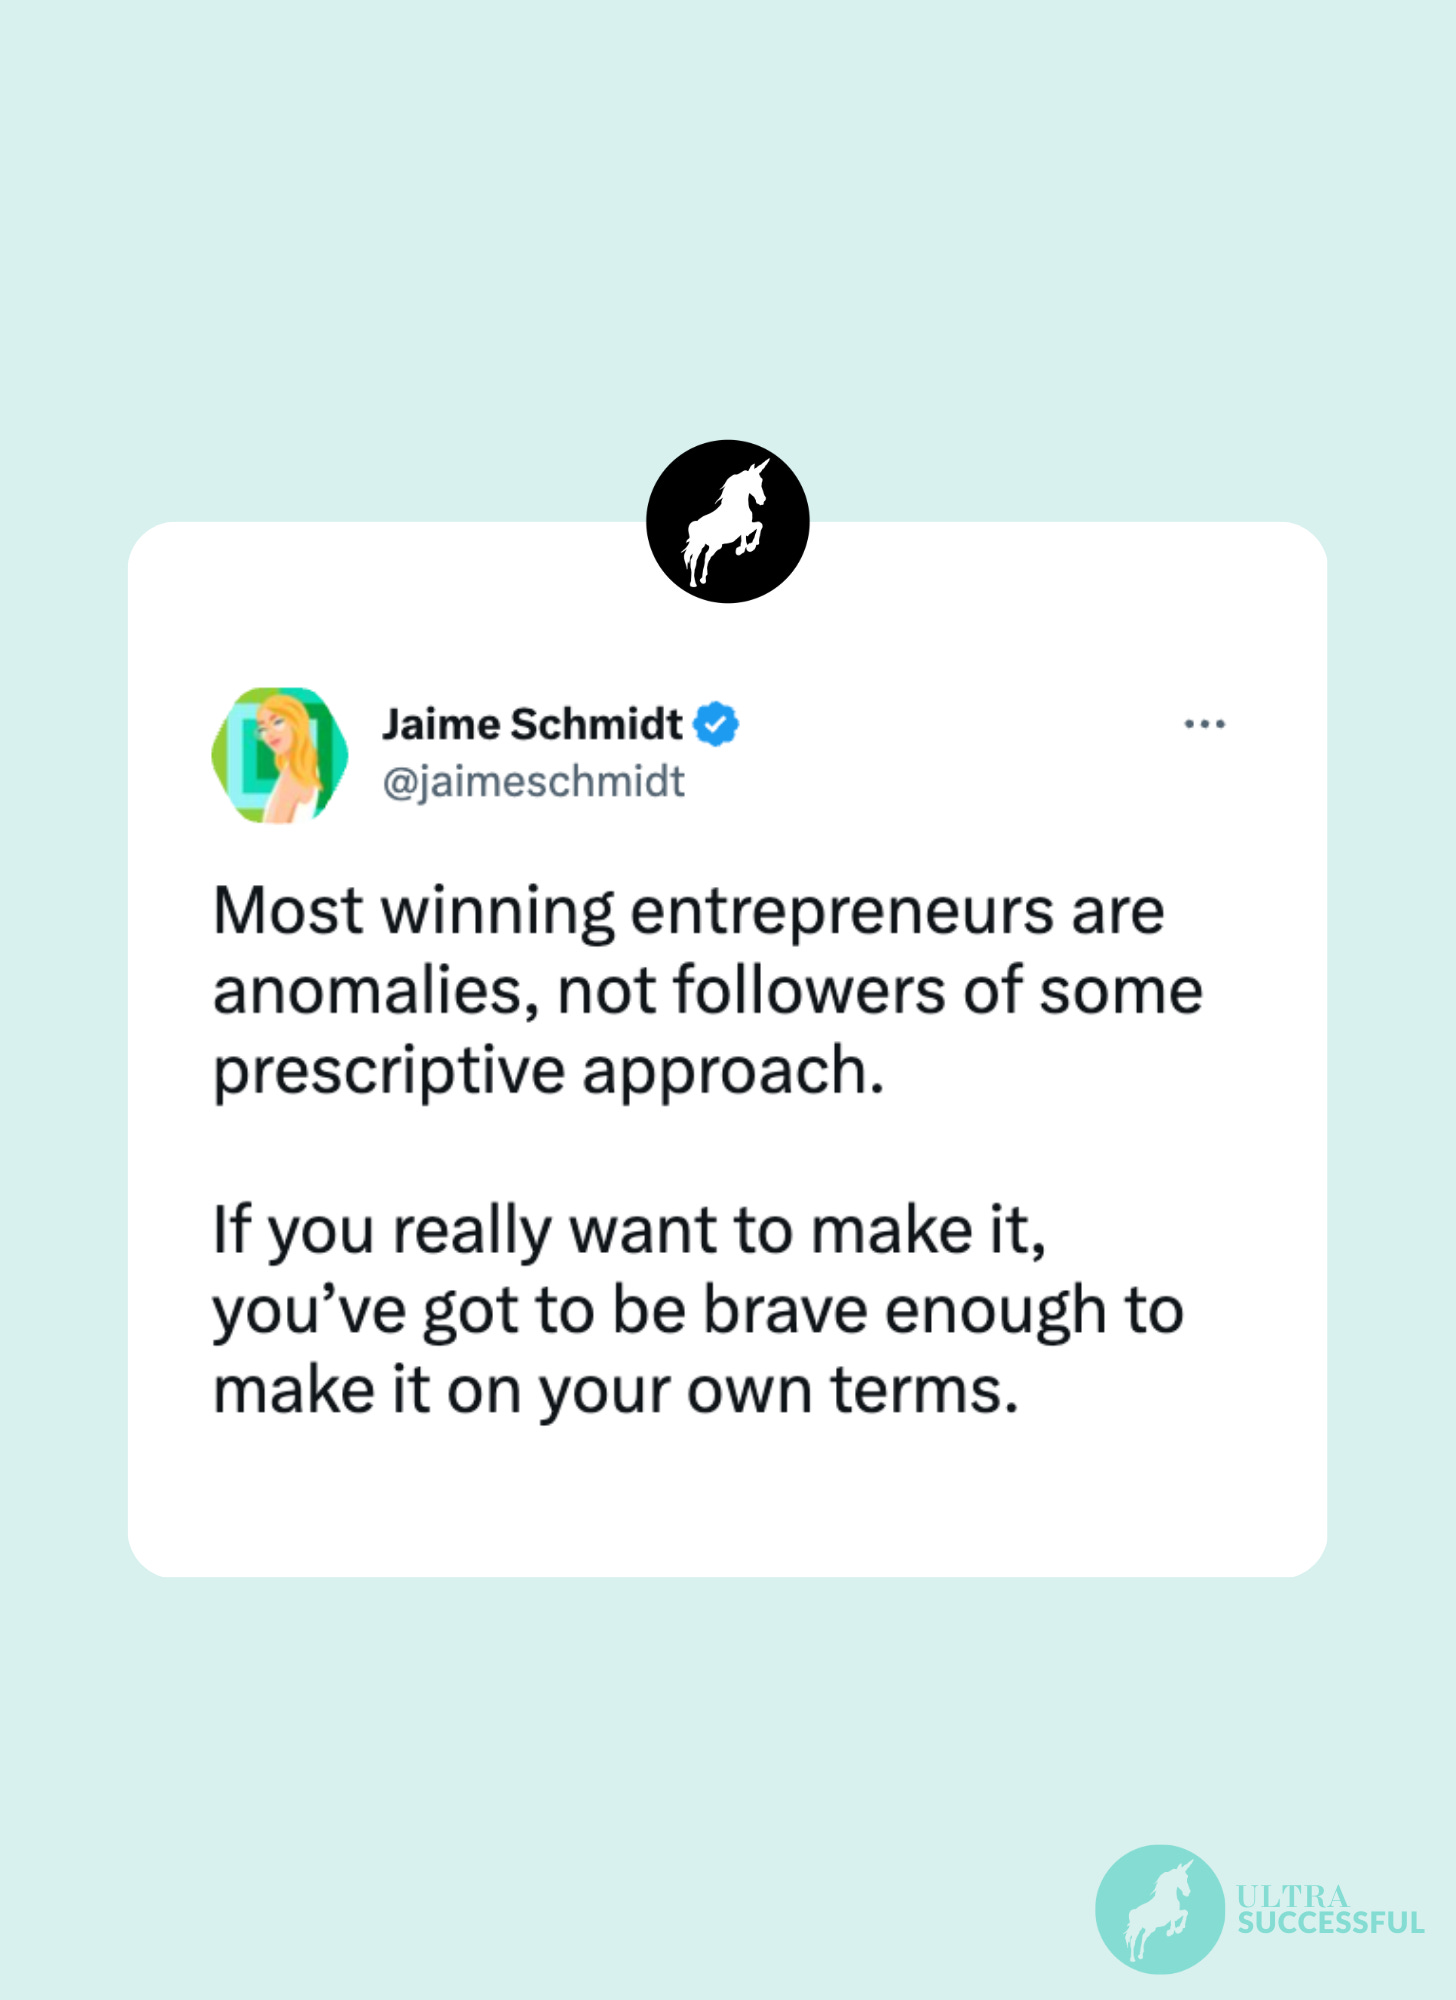 @jaimeschmidt: Most winning entrepreneurs are anomalies, not followers of some prescriptive approach.   If you really want to make it, you’ve got to be brave enough to make it on your own terms.